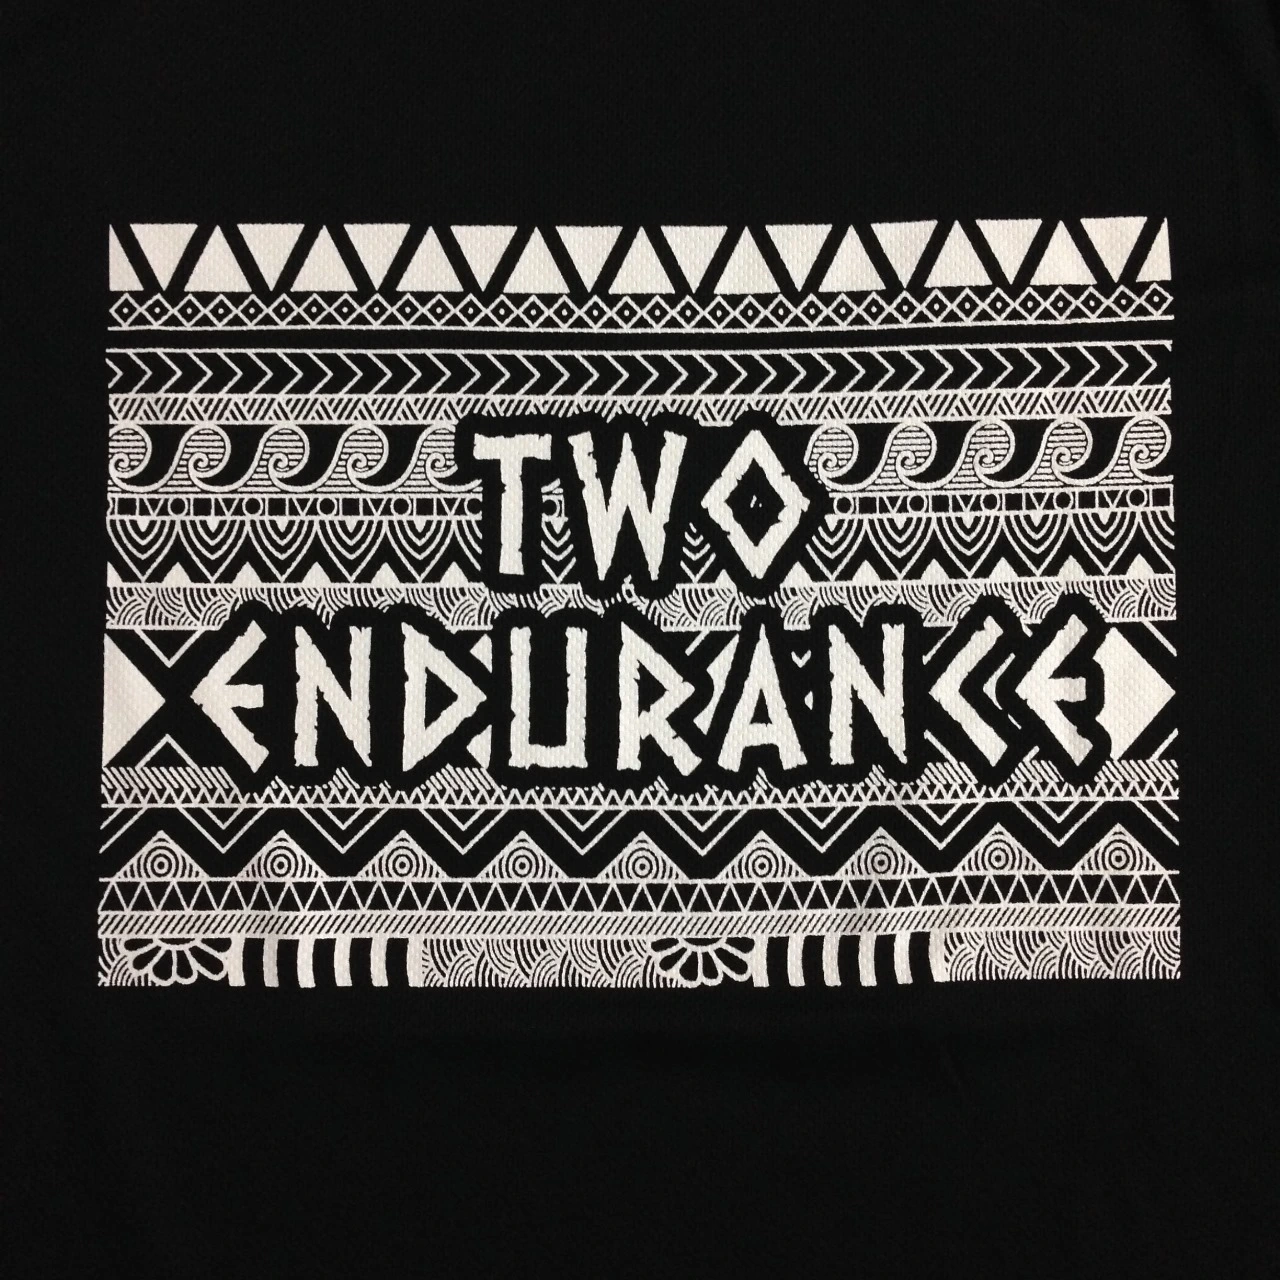 Detailed and complex design done in white silkscreen printing